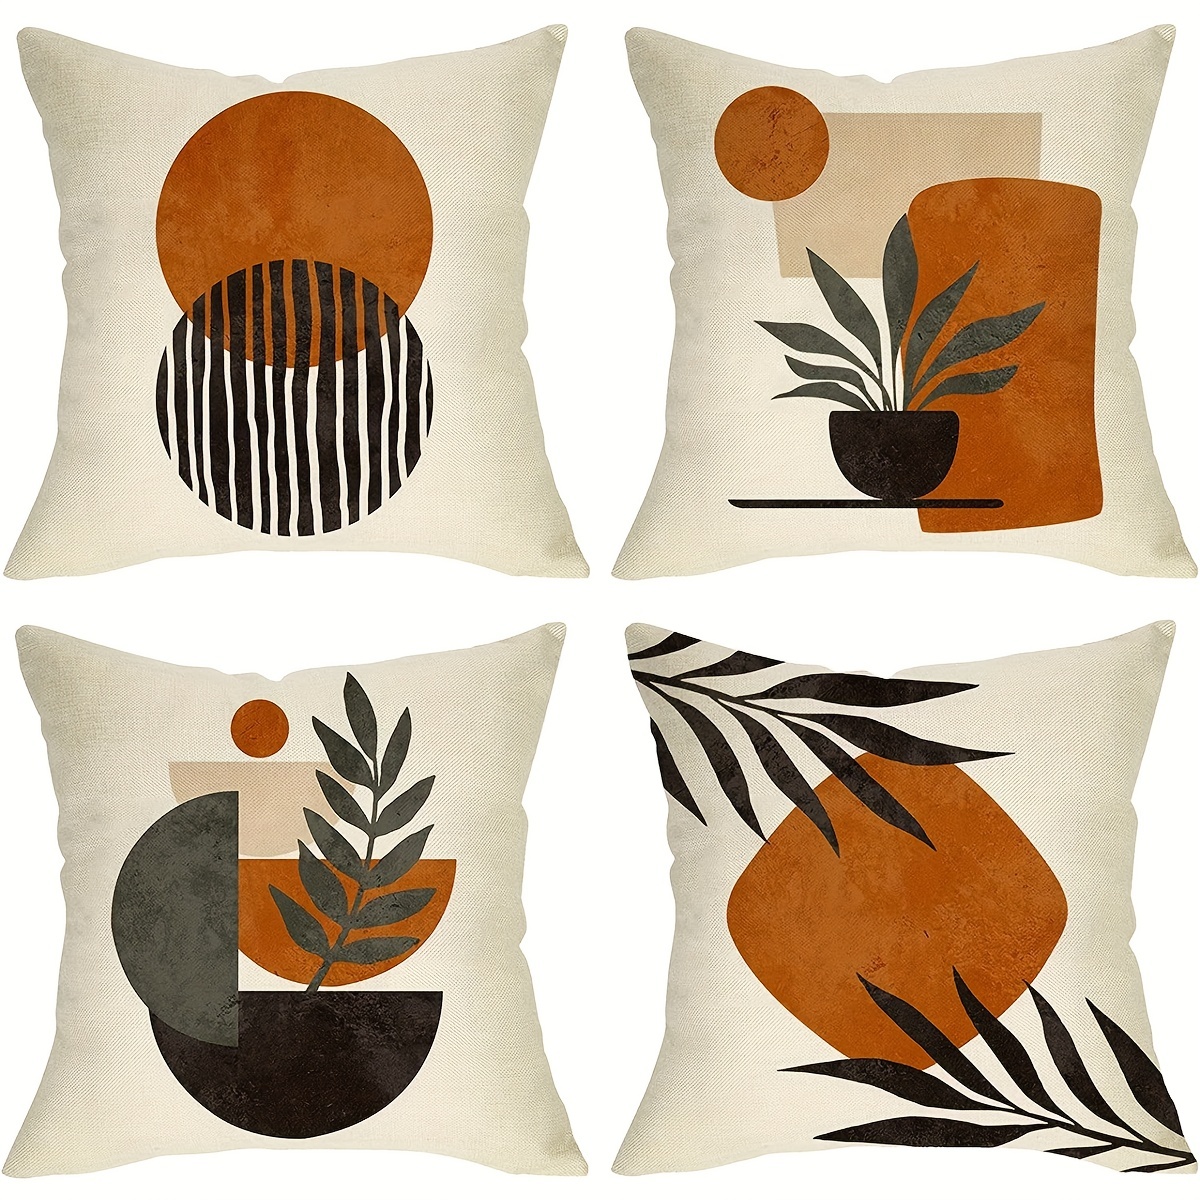 Throw Pillow Covers 18x18 Set of 4 Boho Decorative Outdoor Pillows Nature  Abstract Plant Leaf Modern Art Pillow Cases for Living Room Couch Sofa